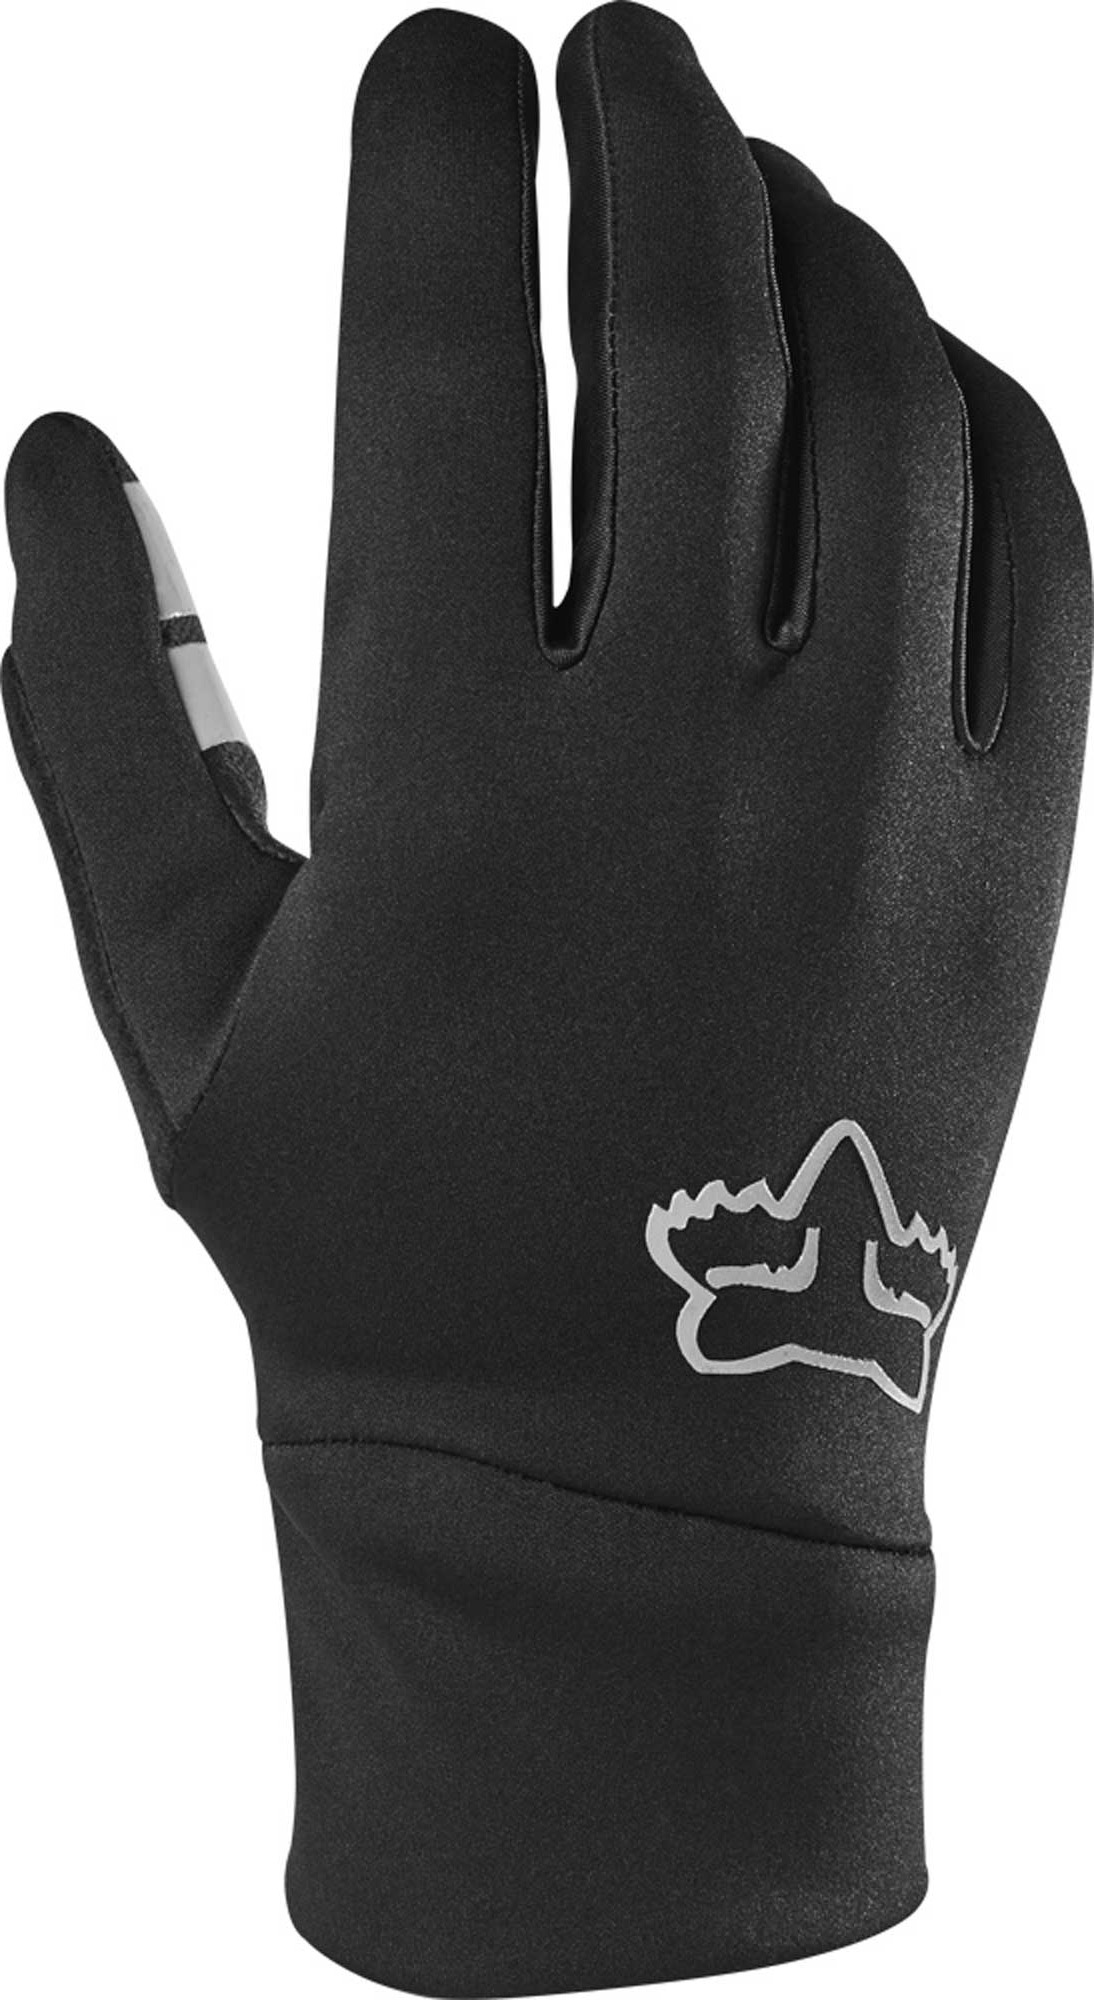 Women’s insulated gloves